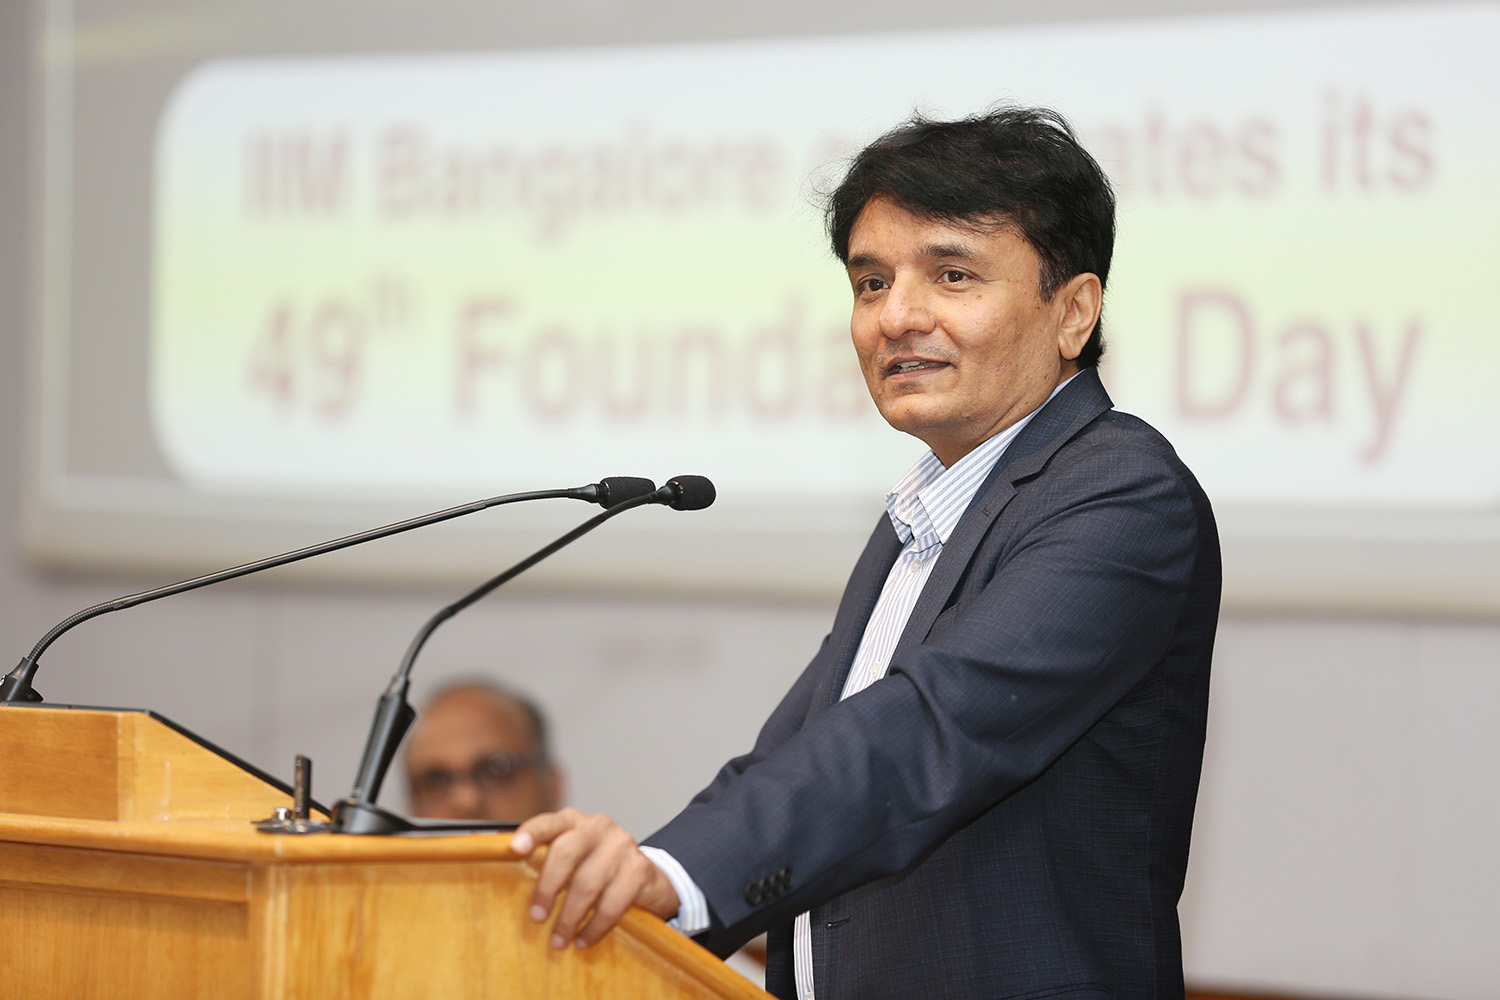 Mr M. D. Ranganath, Member of the Board of Governors, IIMB, addresses the audience.